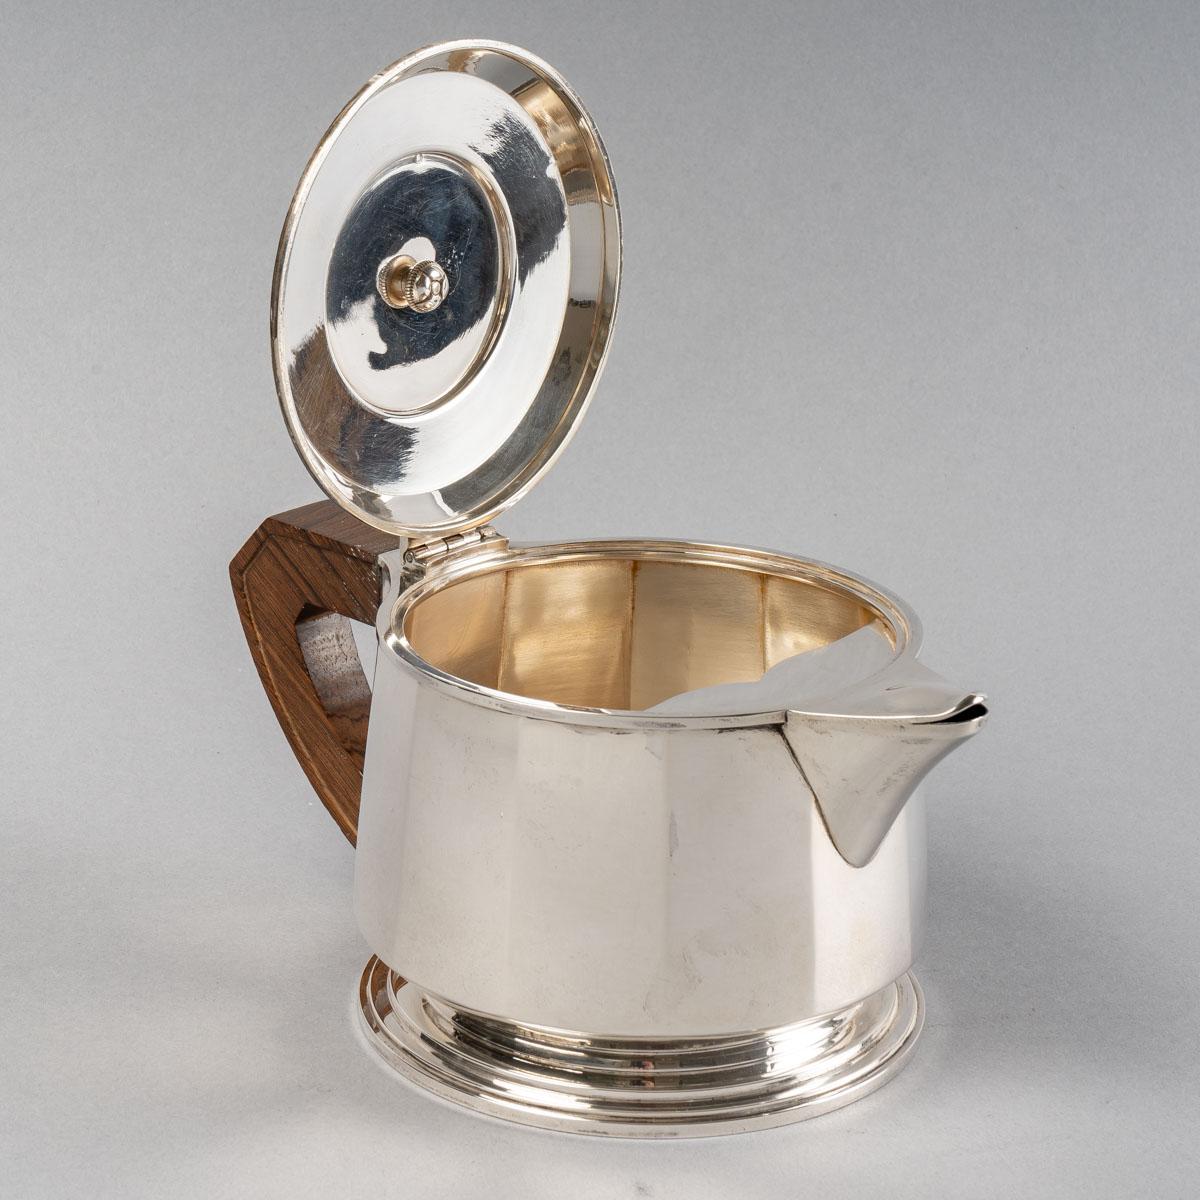 1925 Puiforcat, Tea and Coffee Service in Sterling Silver and Rosewood For Sale 2